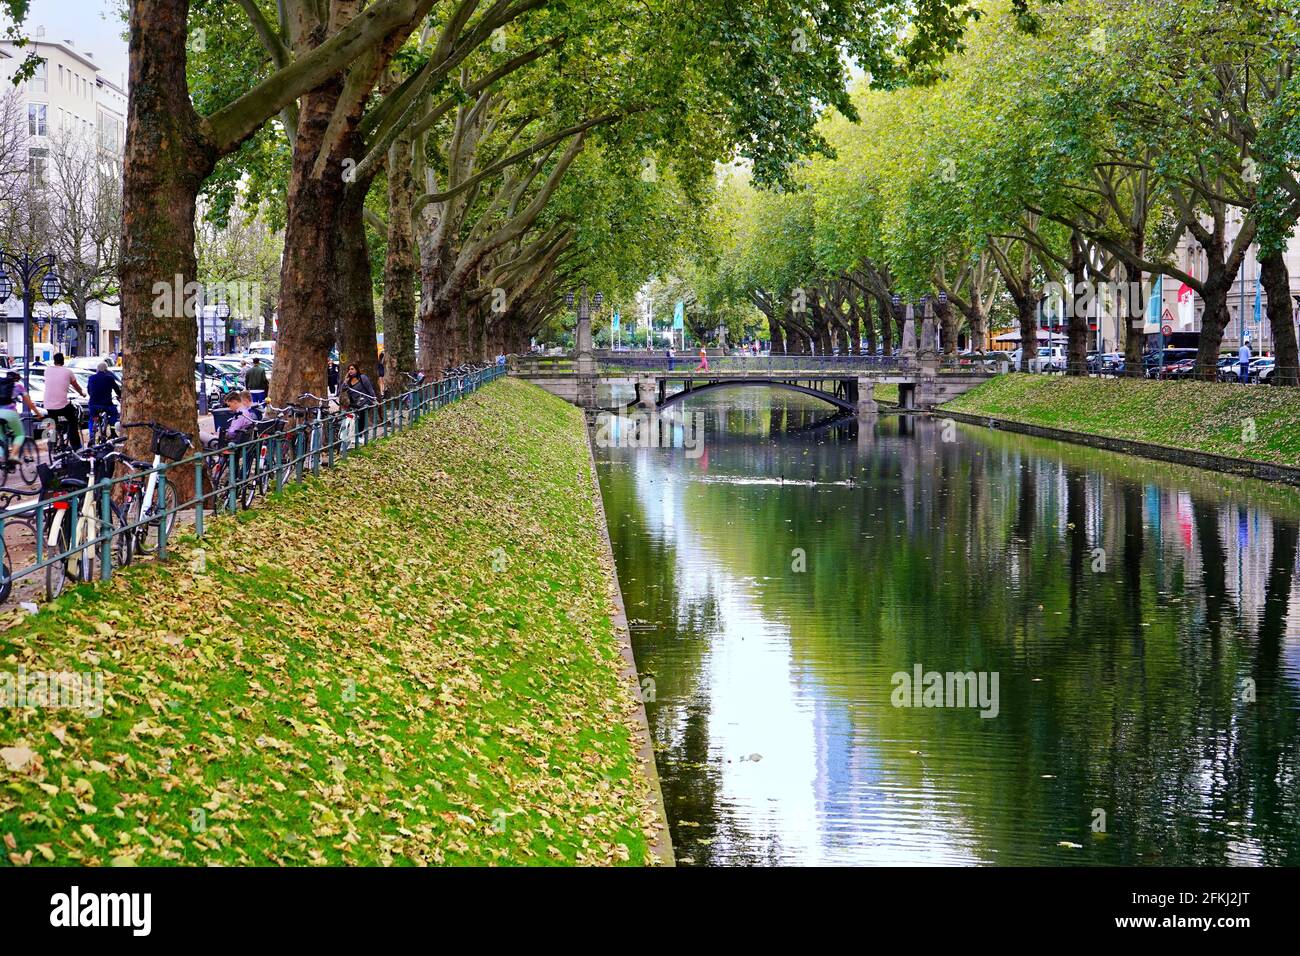 The beautiful green city canal 'Kö-Graben' on Königsallee in Düsseldorf - a piece of green nature in the heart of the city. Stock Photo